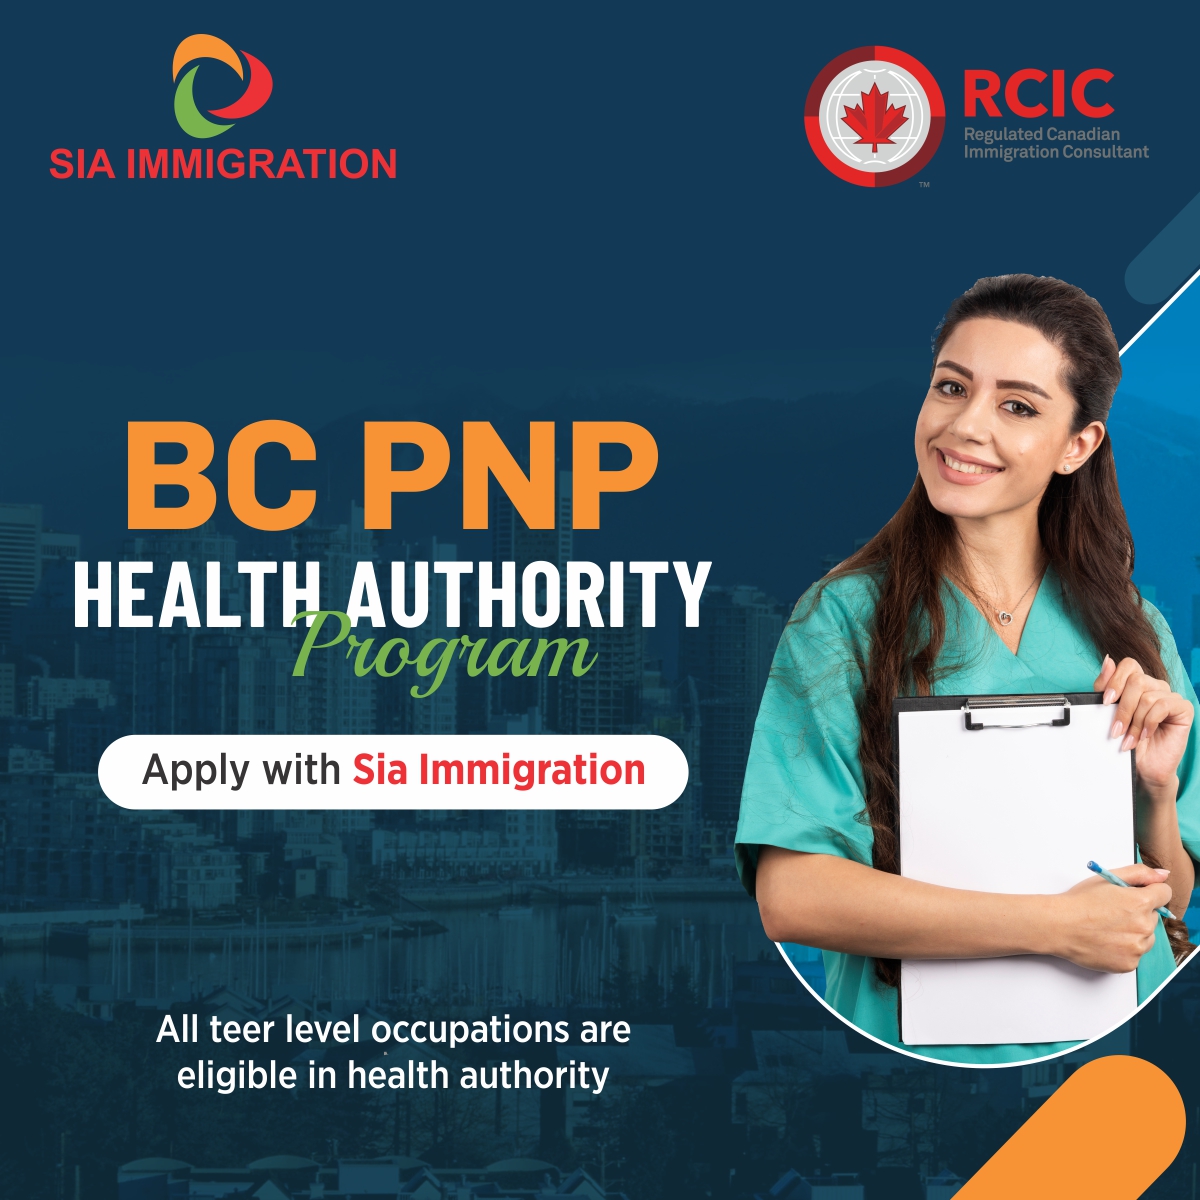 BC PNP Health Authority Program 

To read full article click on the below 👇 given link: 
siaimmigration.com/blog/BC-PNP-He…

Apply with SiaImmigration
Call +1-778-257-5508, +1-778-257-5709
visit: siaimmigration.com
#BCPNP #HealthAuthority #StudyinCanada #CanadaVisa #CanadianPR #Best